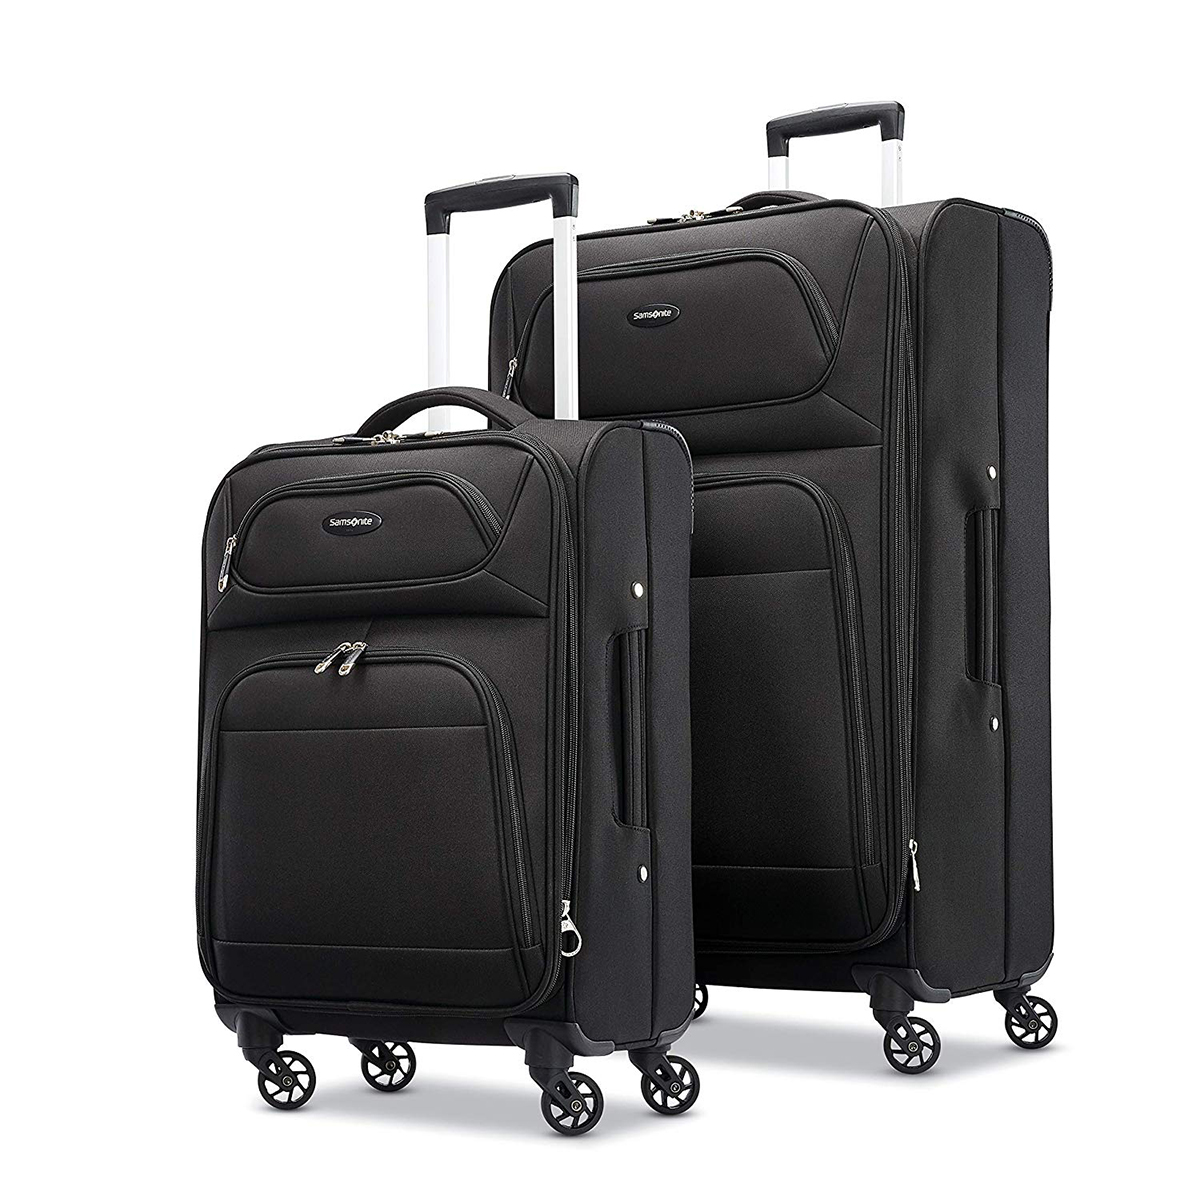 Amazon Prime Day 2019 Deals: Save Over $300 on a Stylish Luggage Set